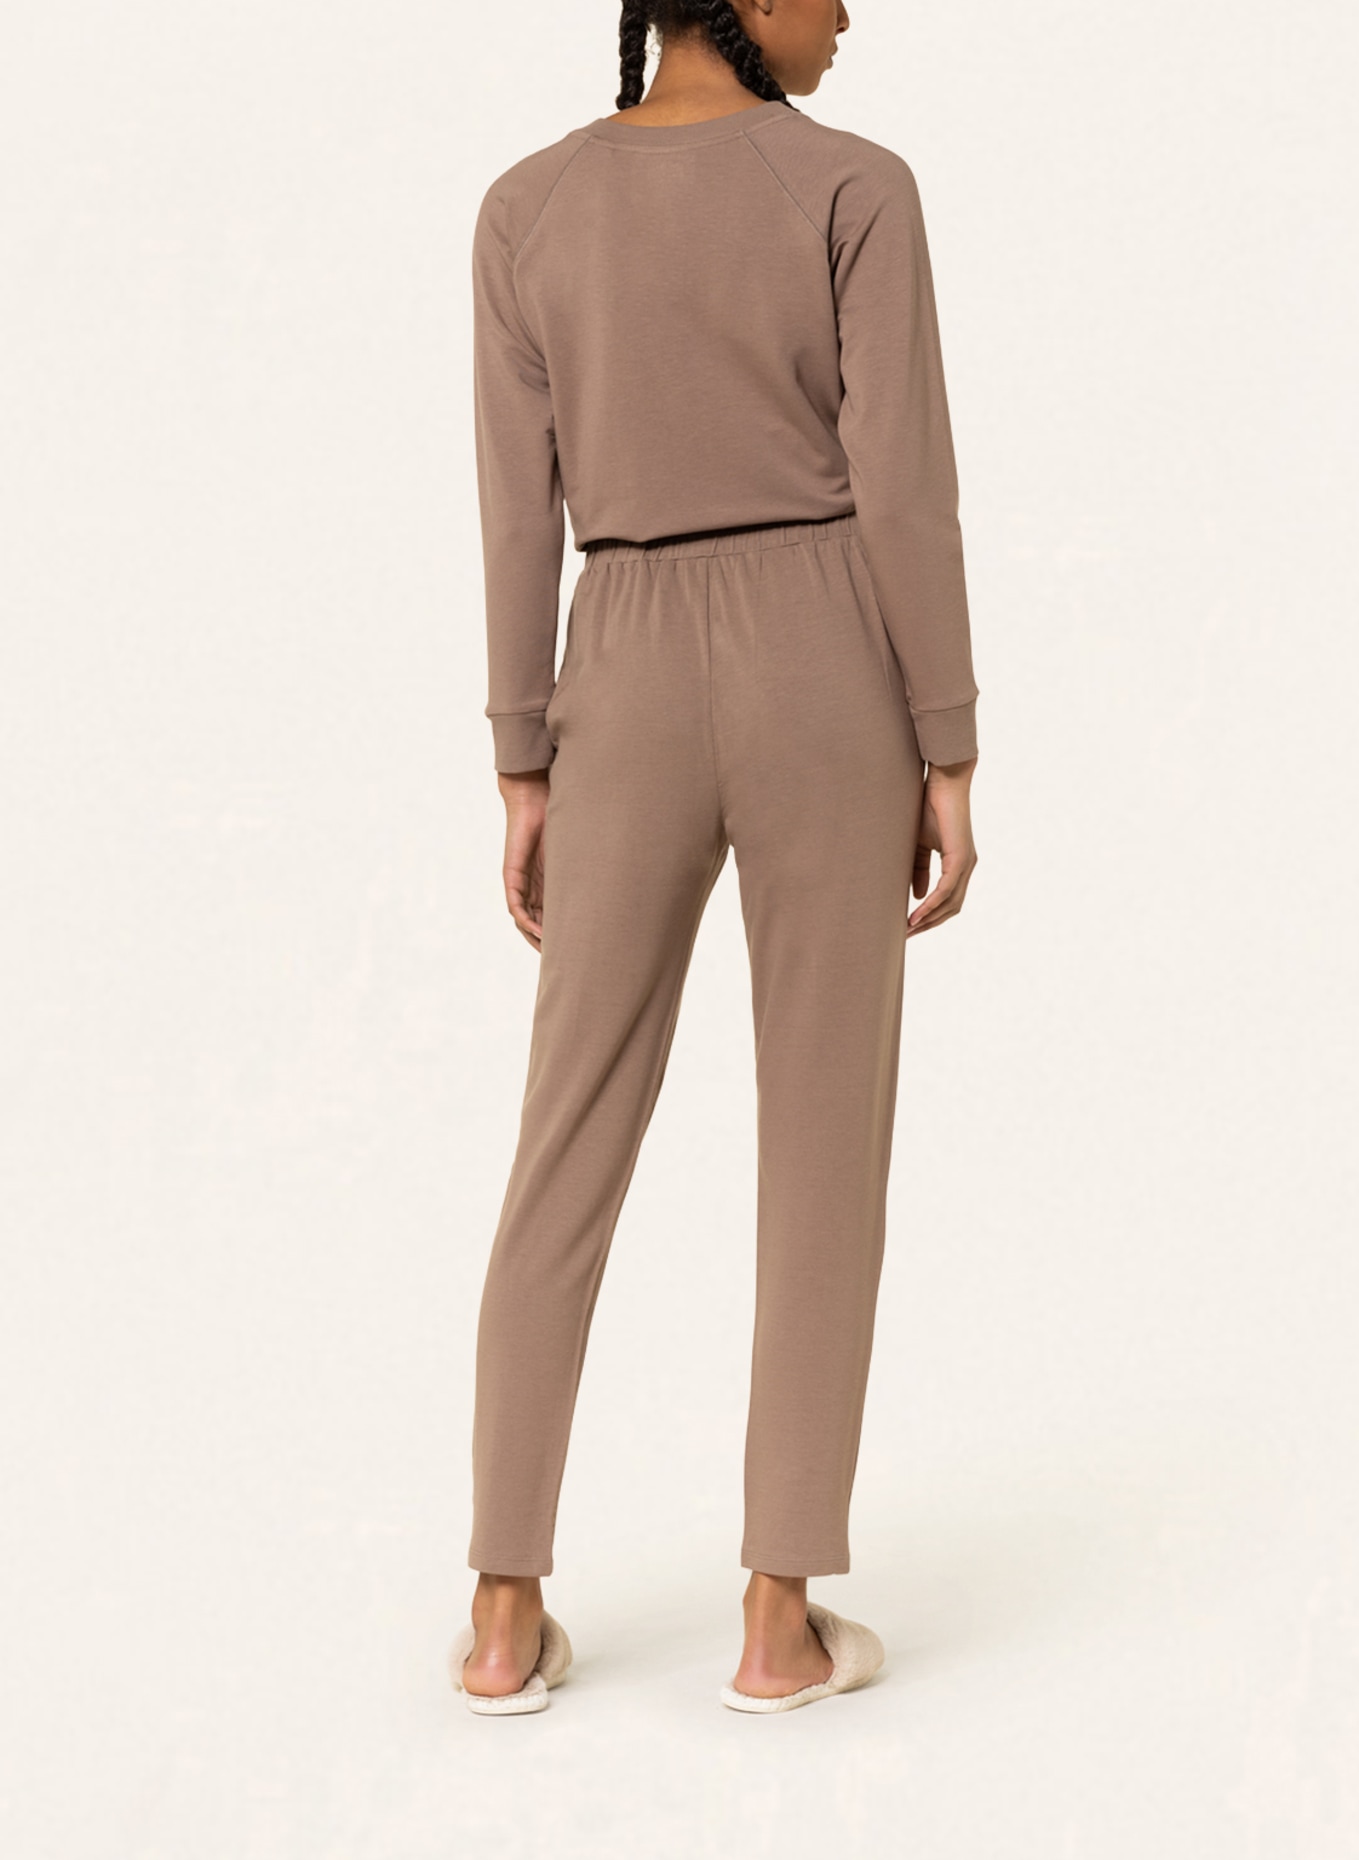 SCHIESSER Lounge pants MIX+RELAX, Color: BROWN (Image 3)